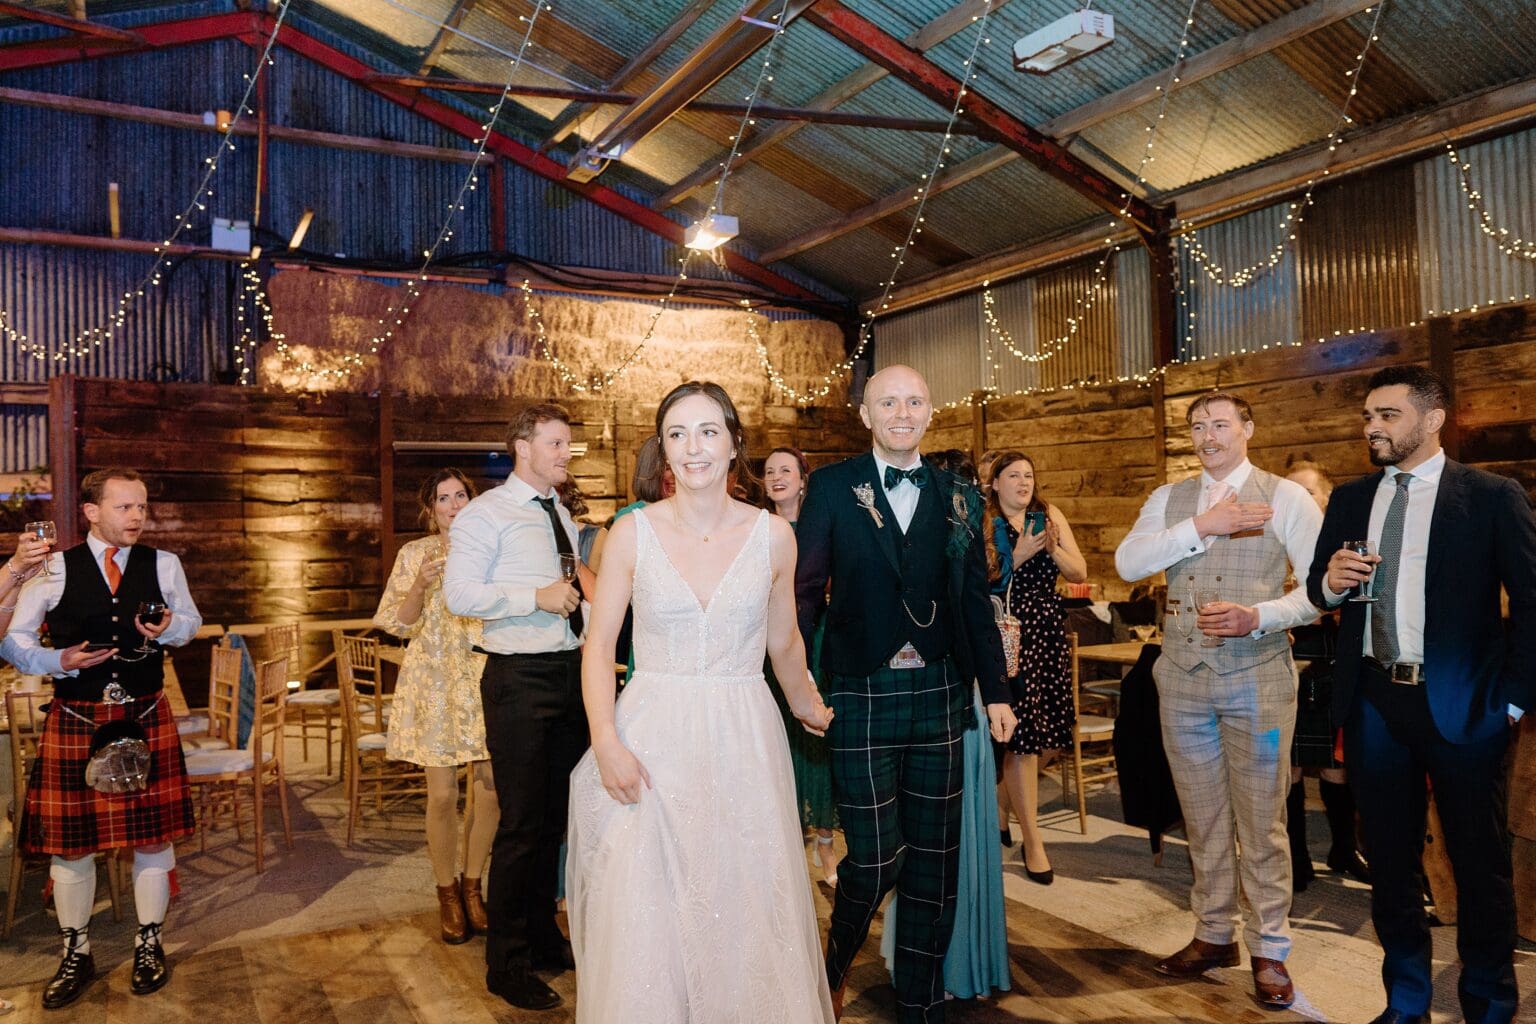 at their farm wedding venues scotland the bride and groom hold hands and walk towards the dancefloor for their first dance as guests look on beneath festoon lighting